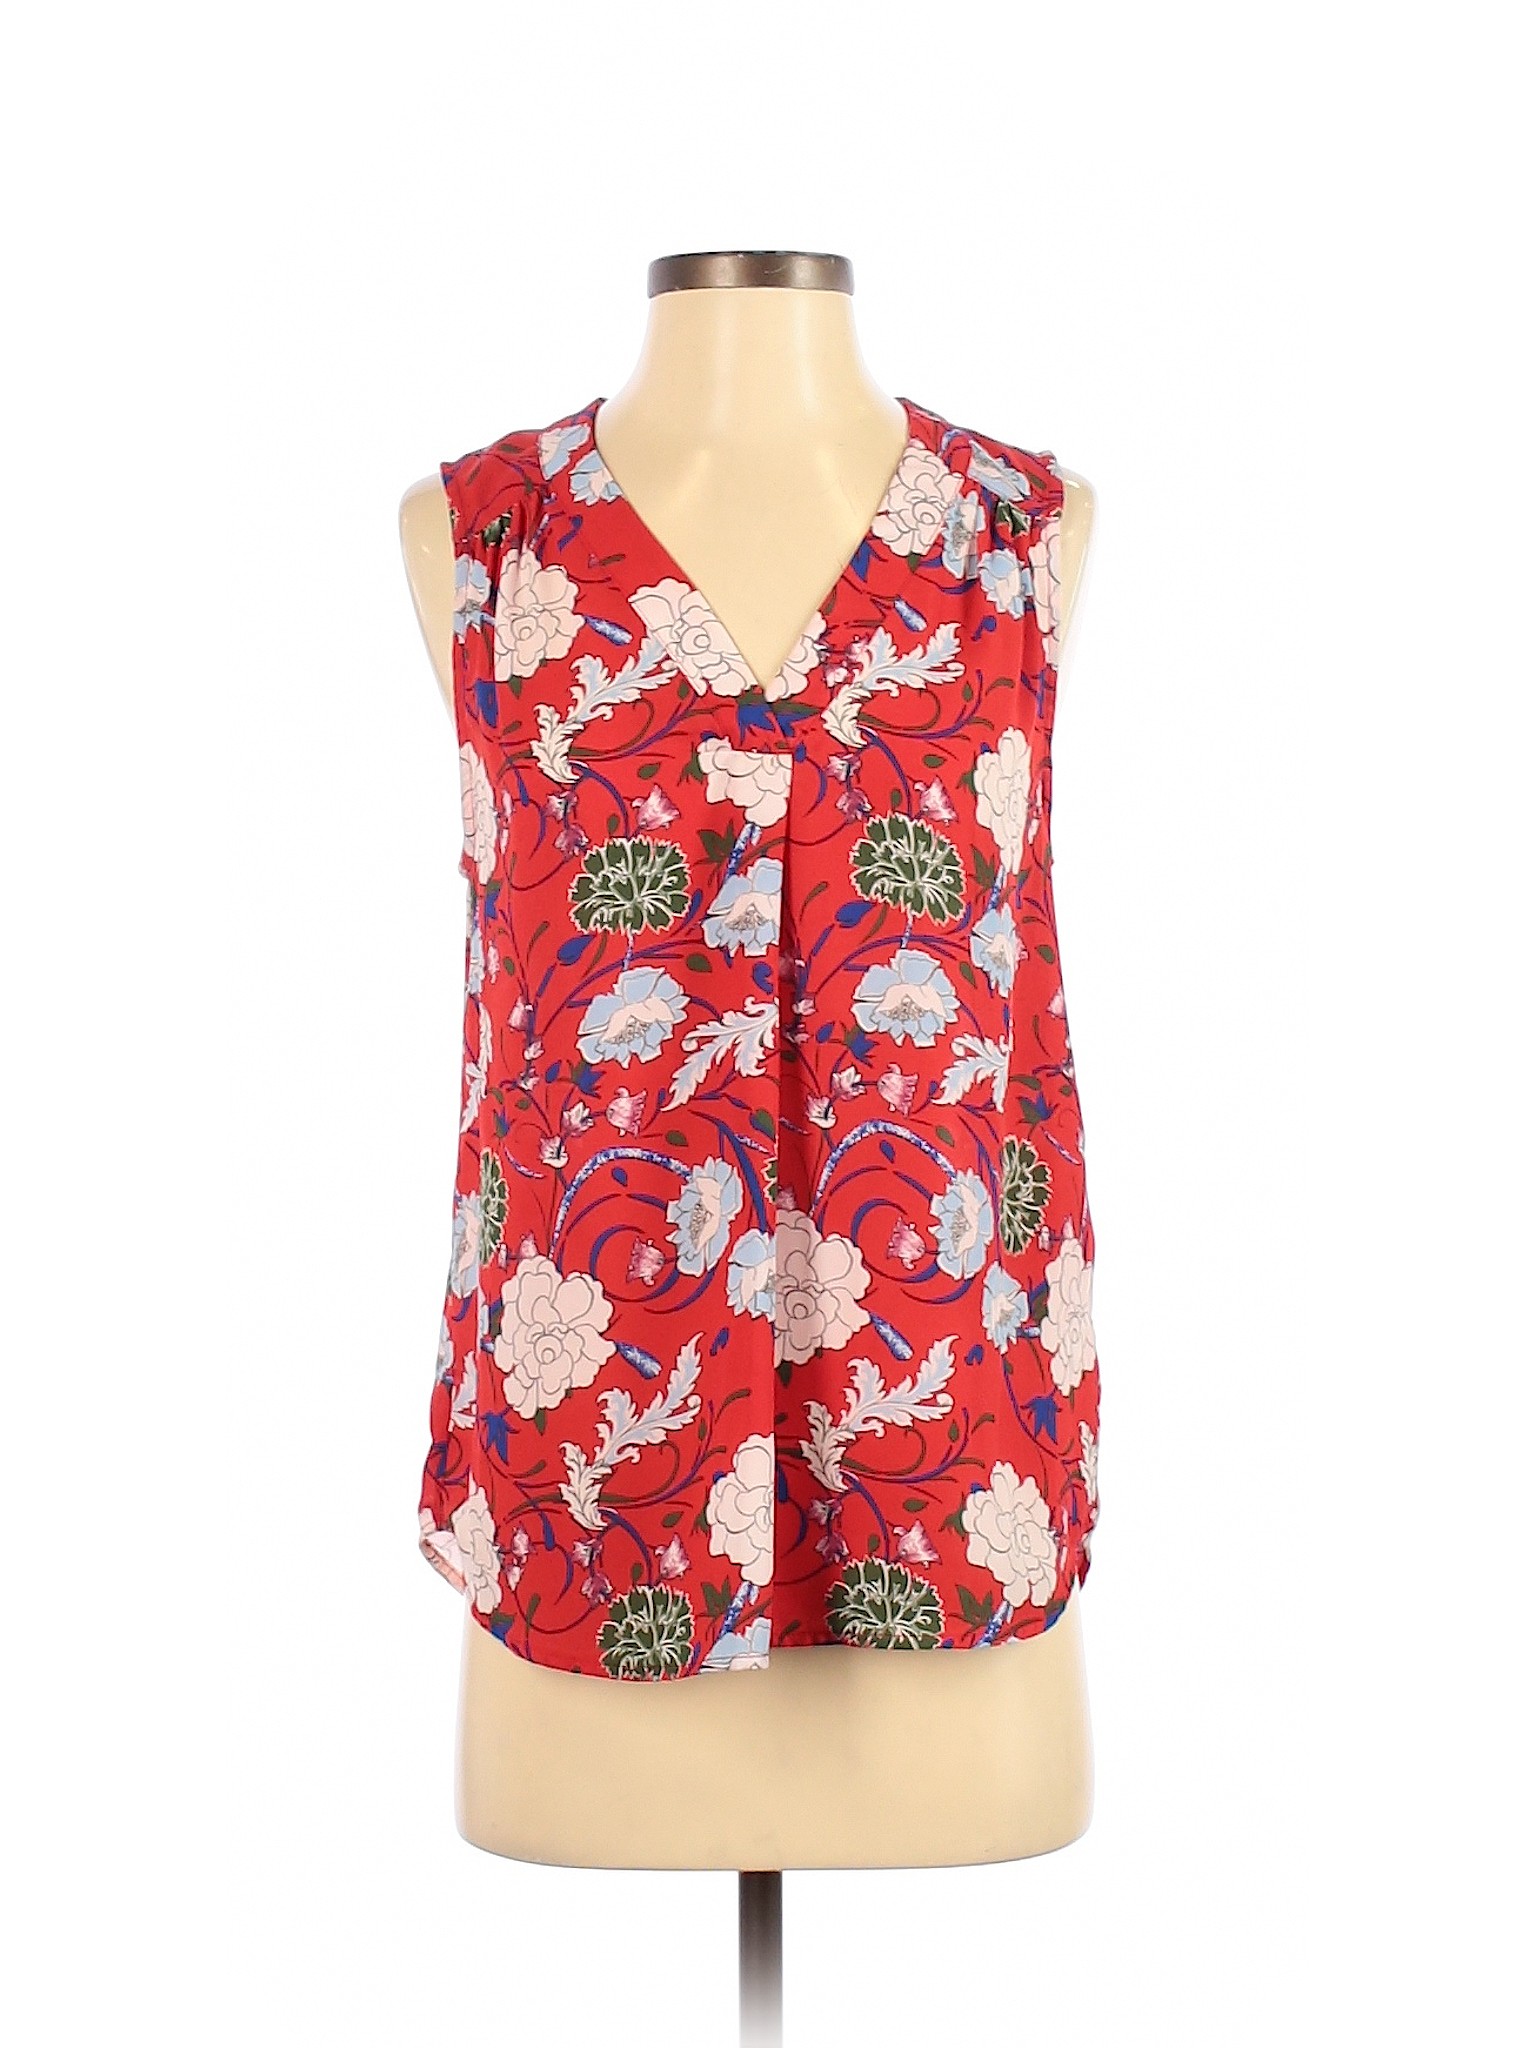 Eliane Rose 100% Polyester Floral Red Sleeveless Blouse Size S - 85% ...